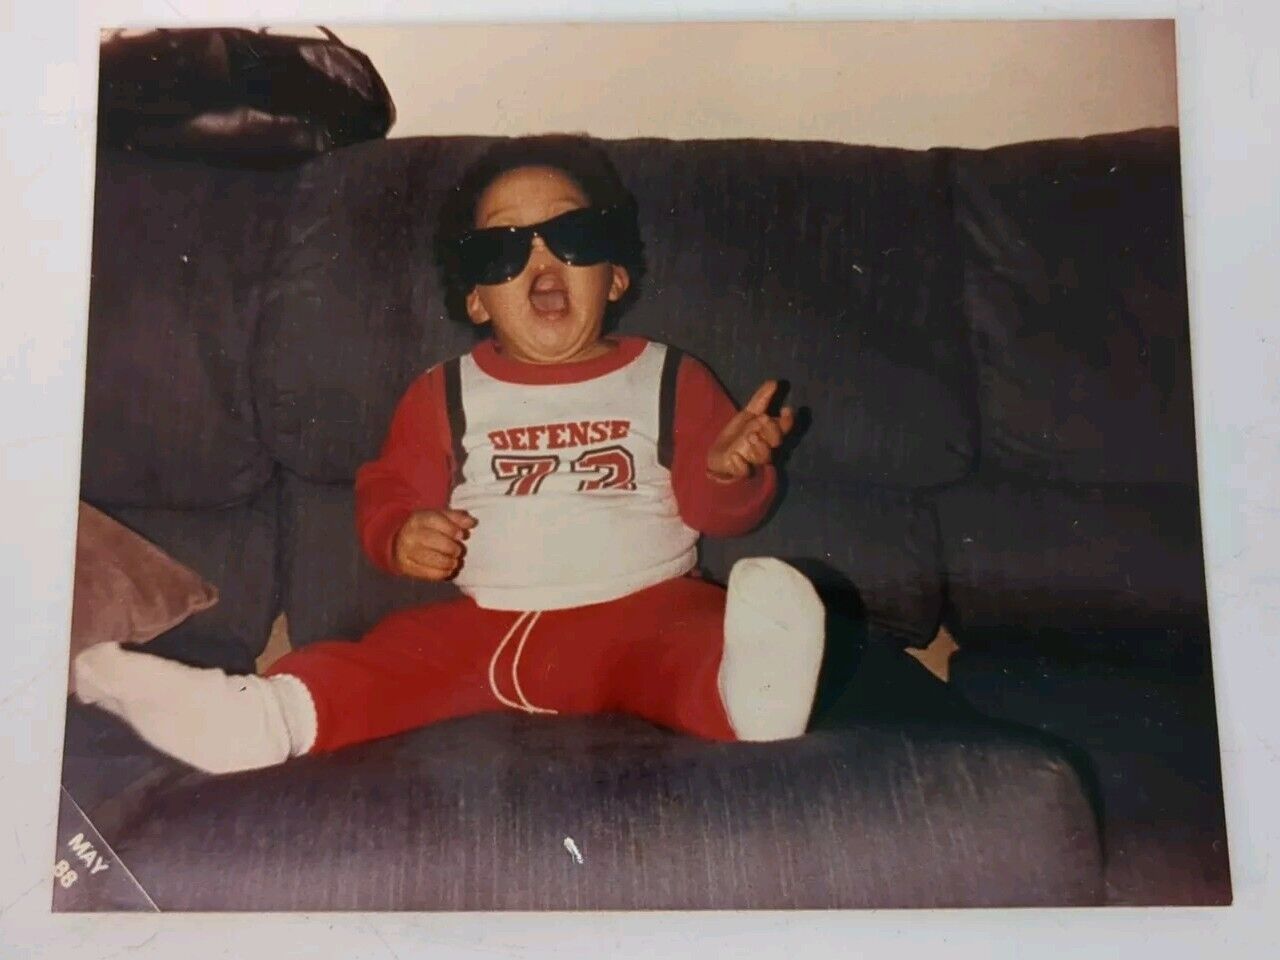 VTG 1988 Found Photograph Original Photo African American Baby Sunglasses Cool